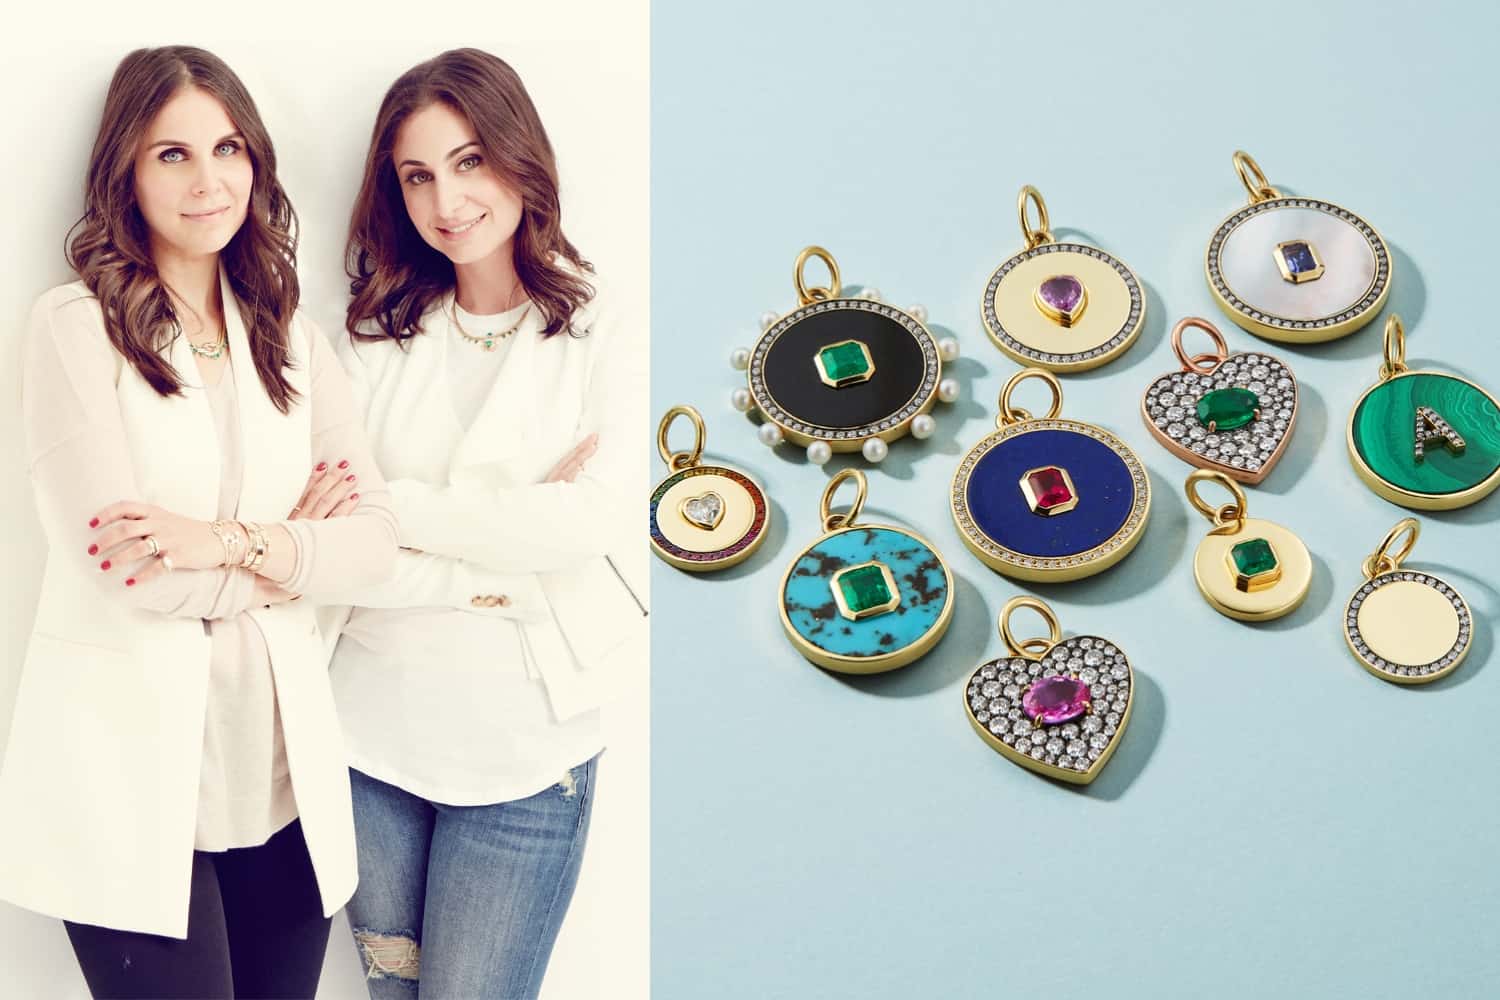 Inspiring Women: Talking Bling With The Founders Of Covetable Jewelry Brand  Jemma Wynne - Daily Front Row